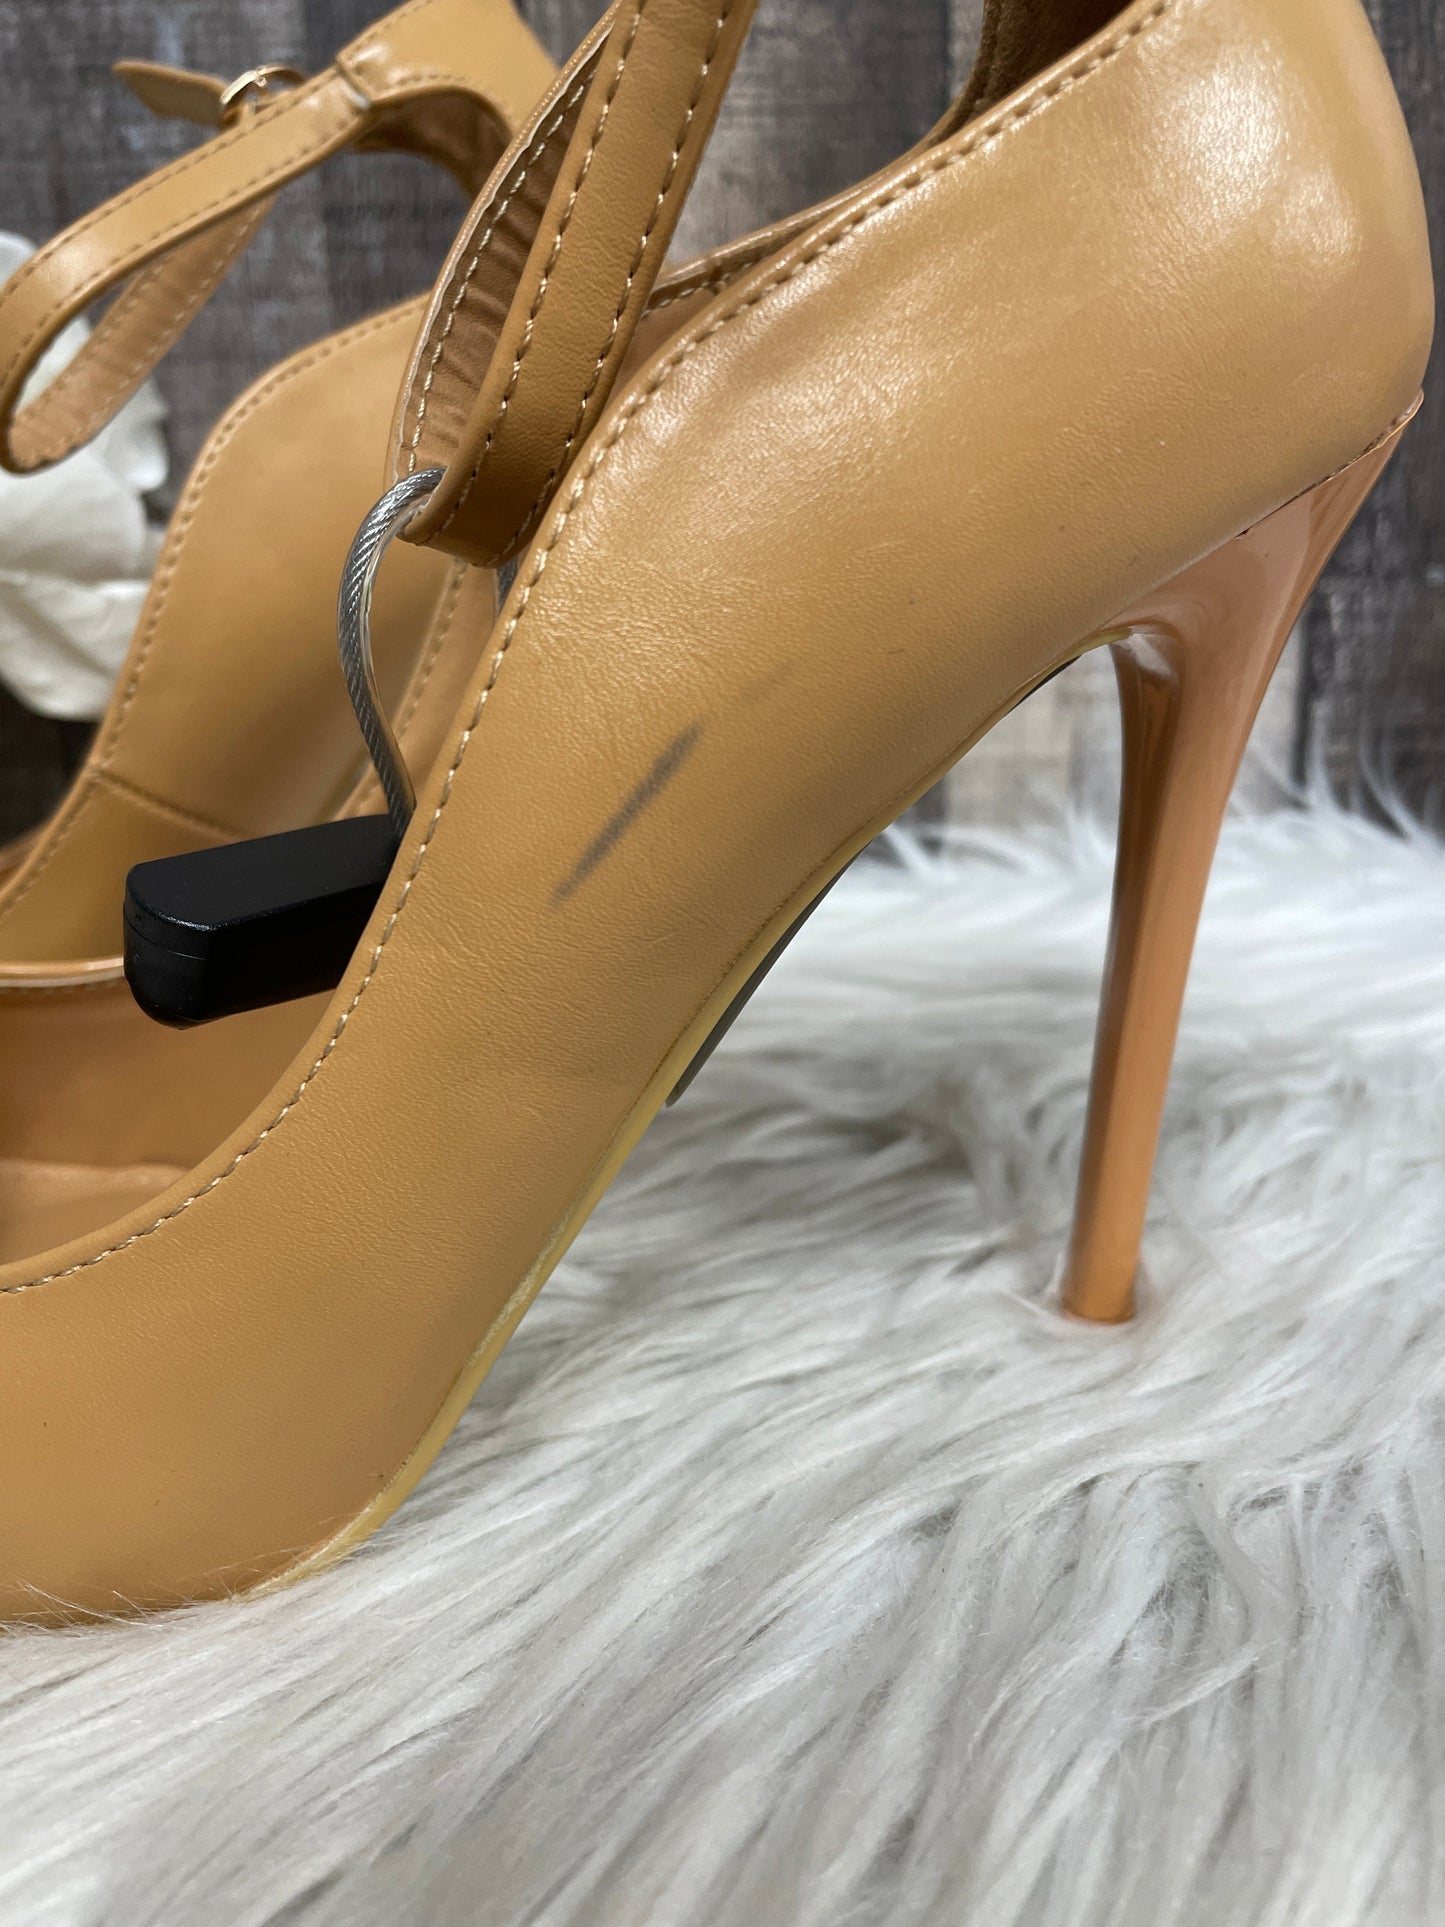 Shoes Heels Stiletto By Cme  Size: 8.5